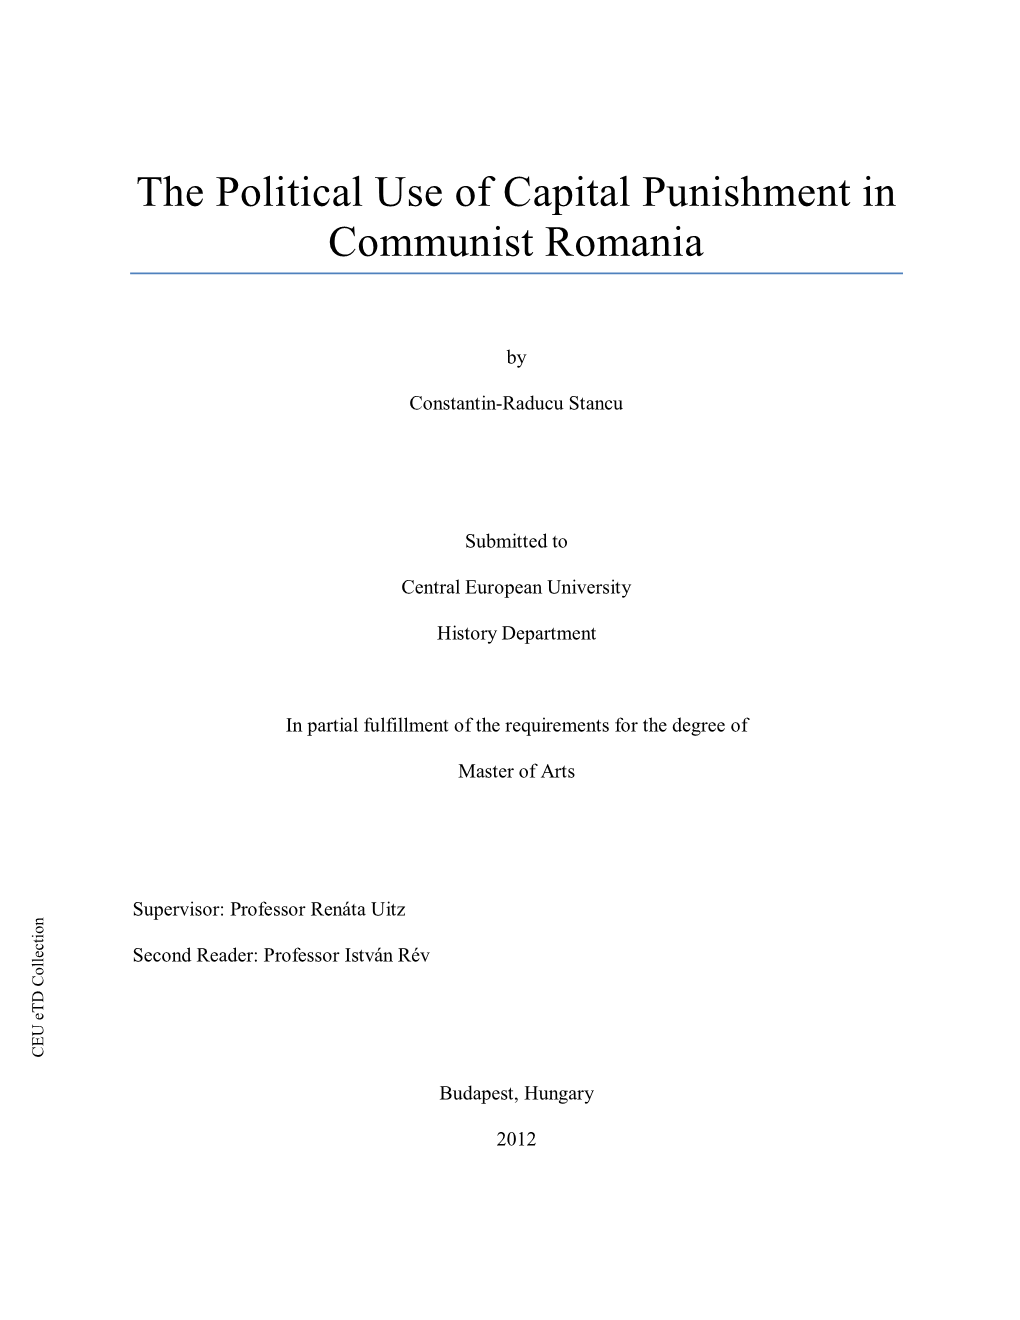 The Political Use of Capital Punishment in Communist Romania